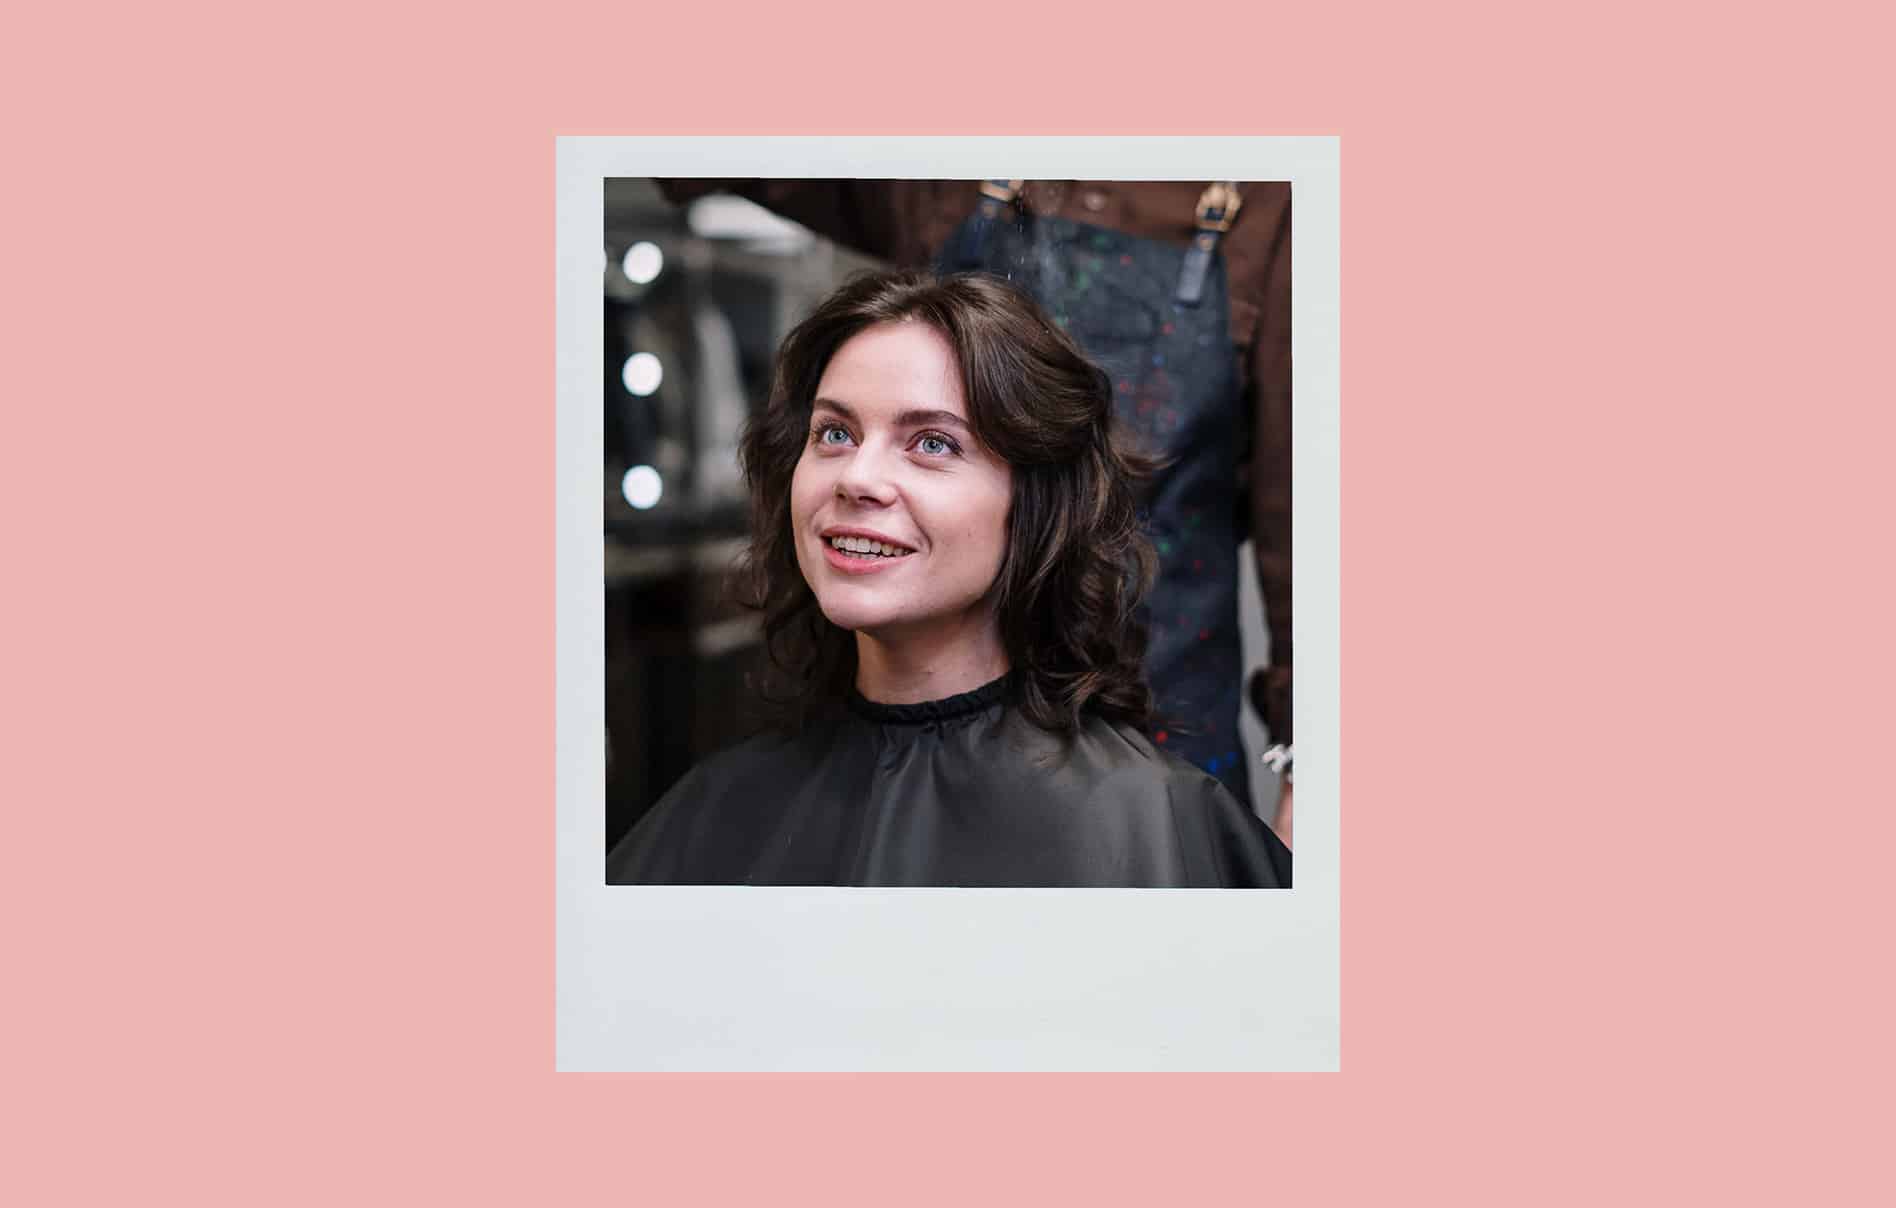 Polaroid of a person smiling with freshly styled hair in a salon